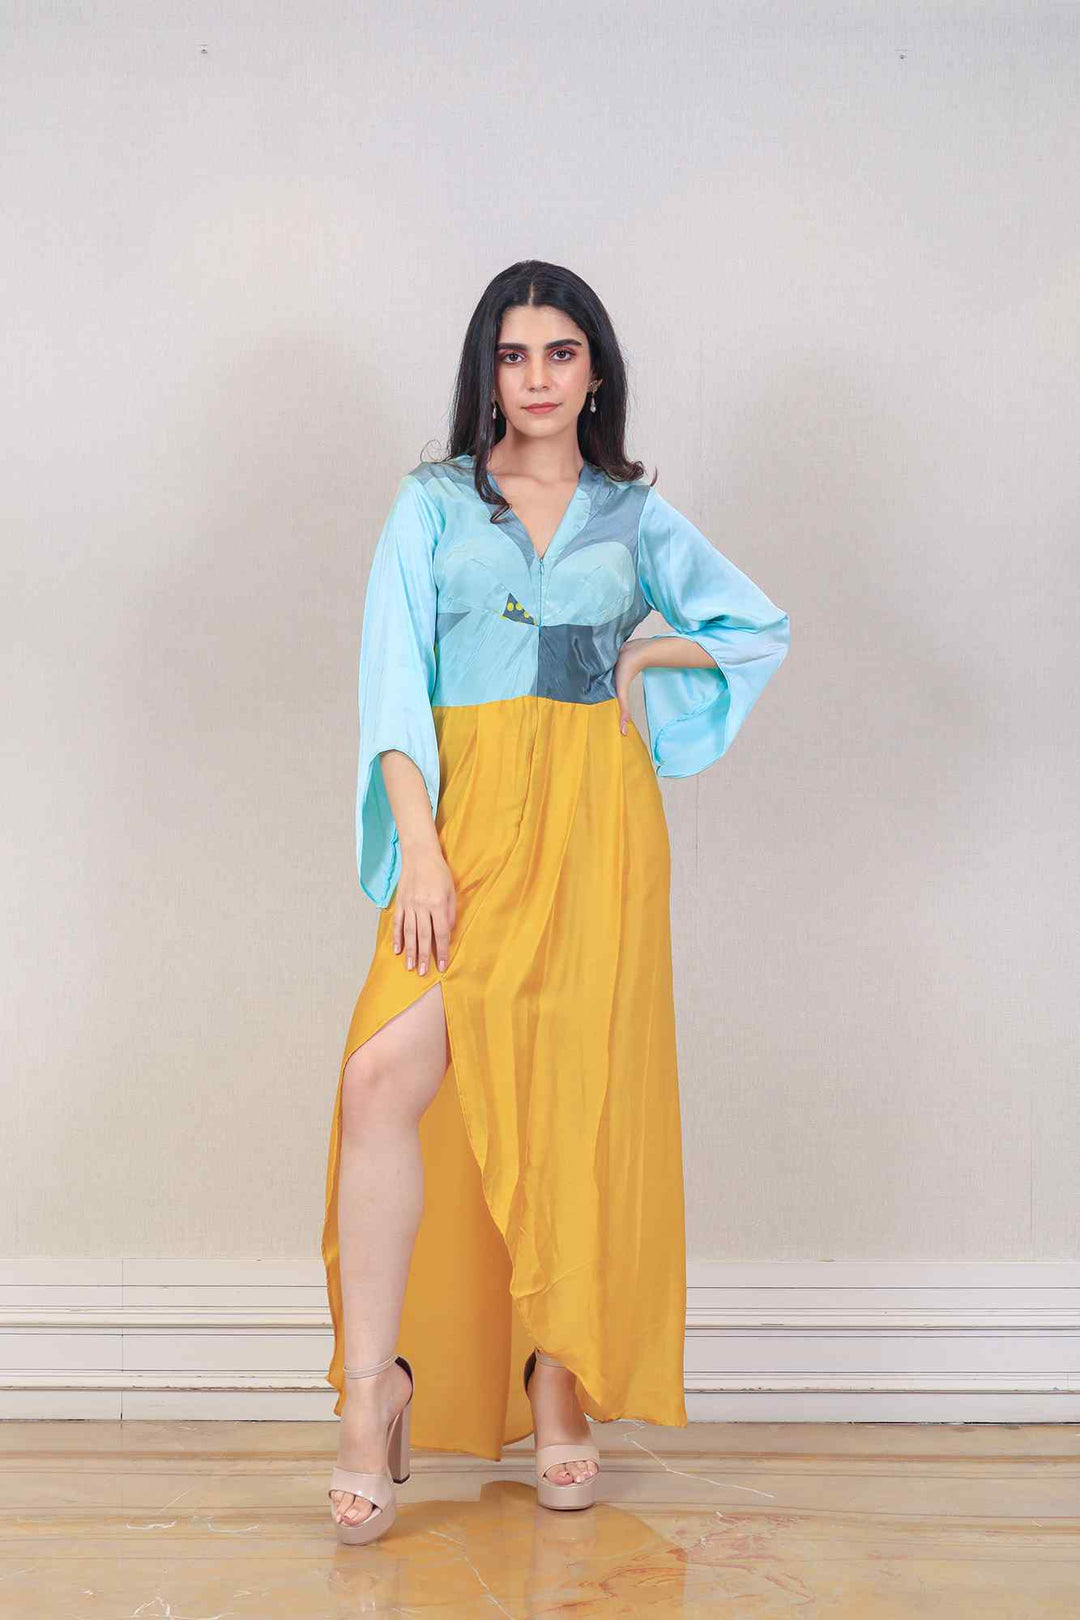 Designer Blue and yellow color Dress